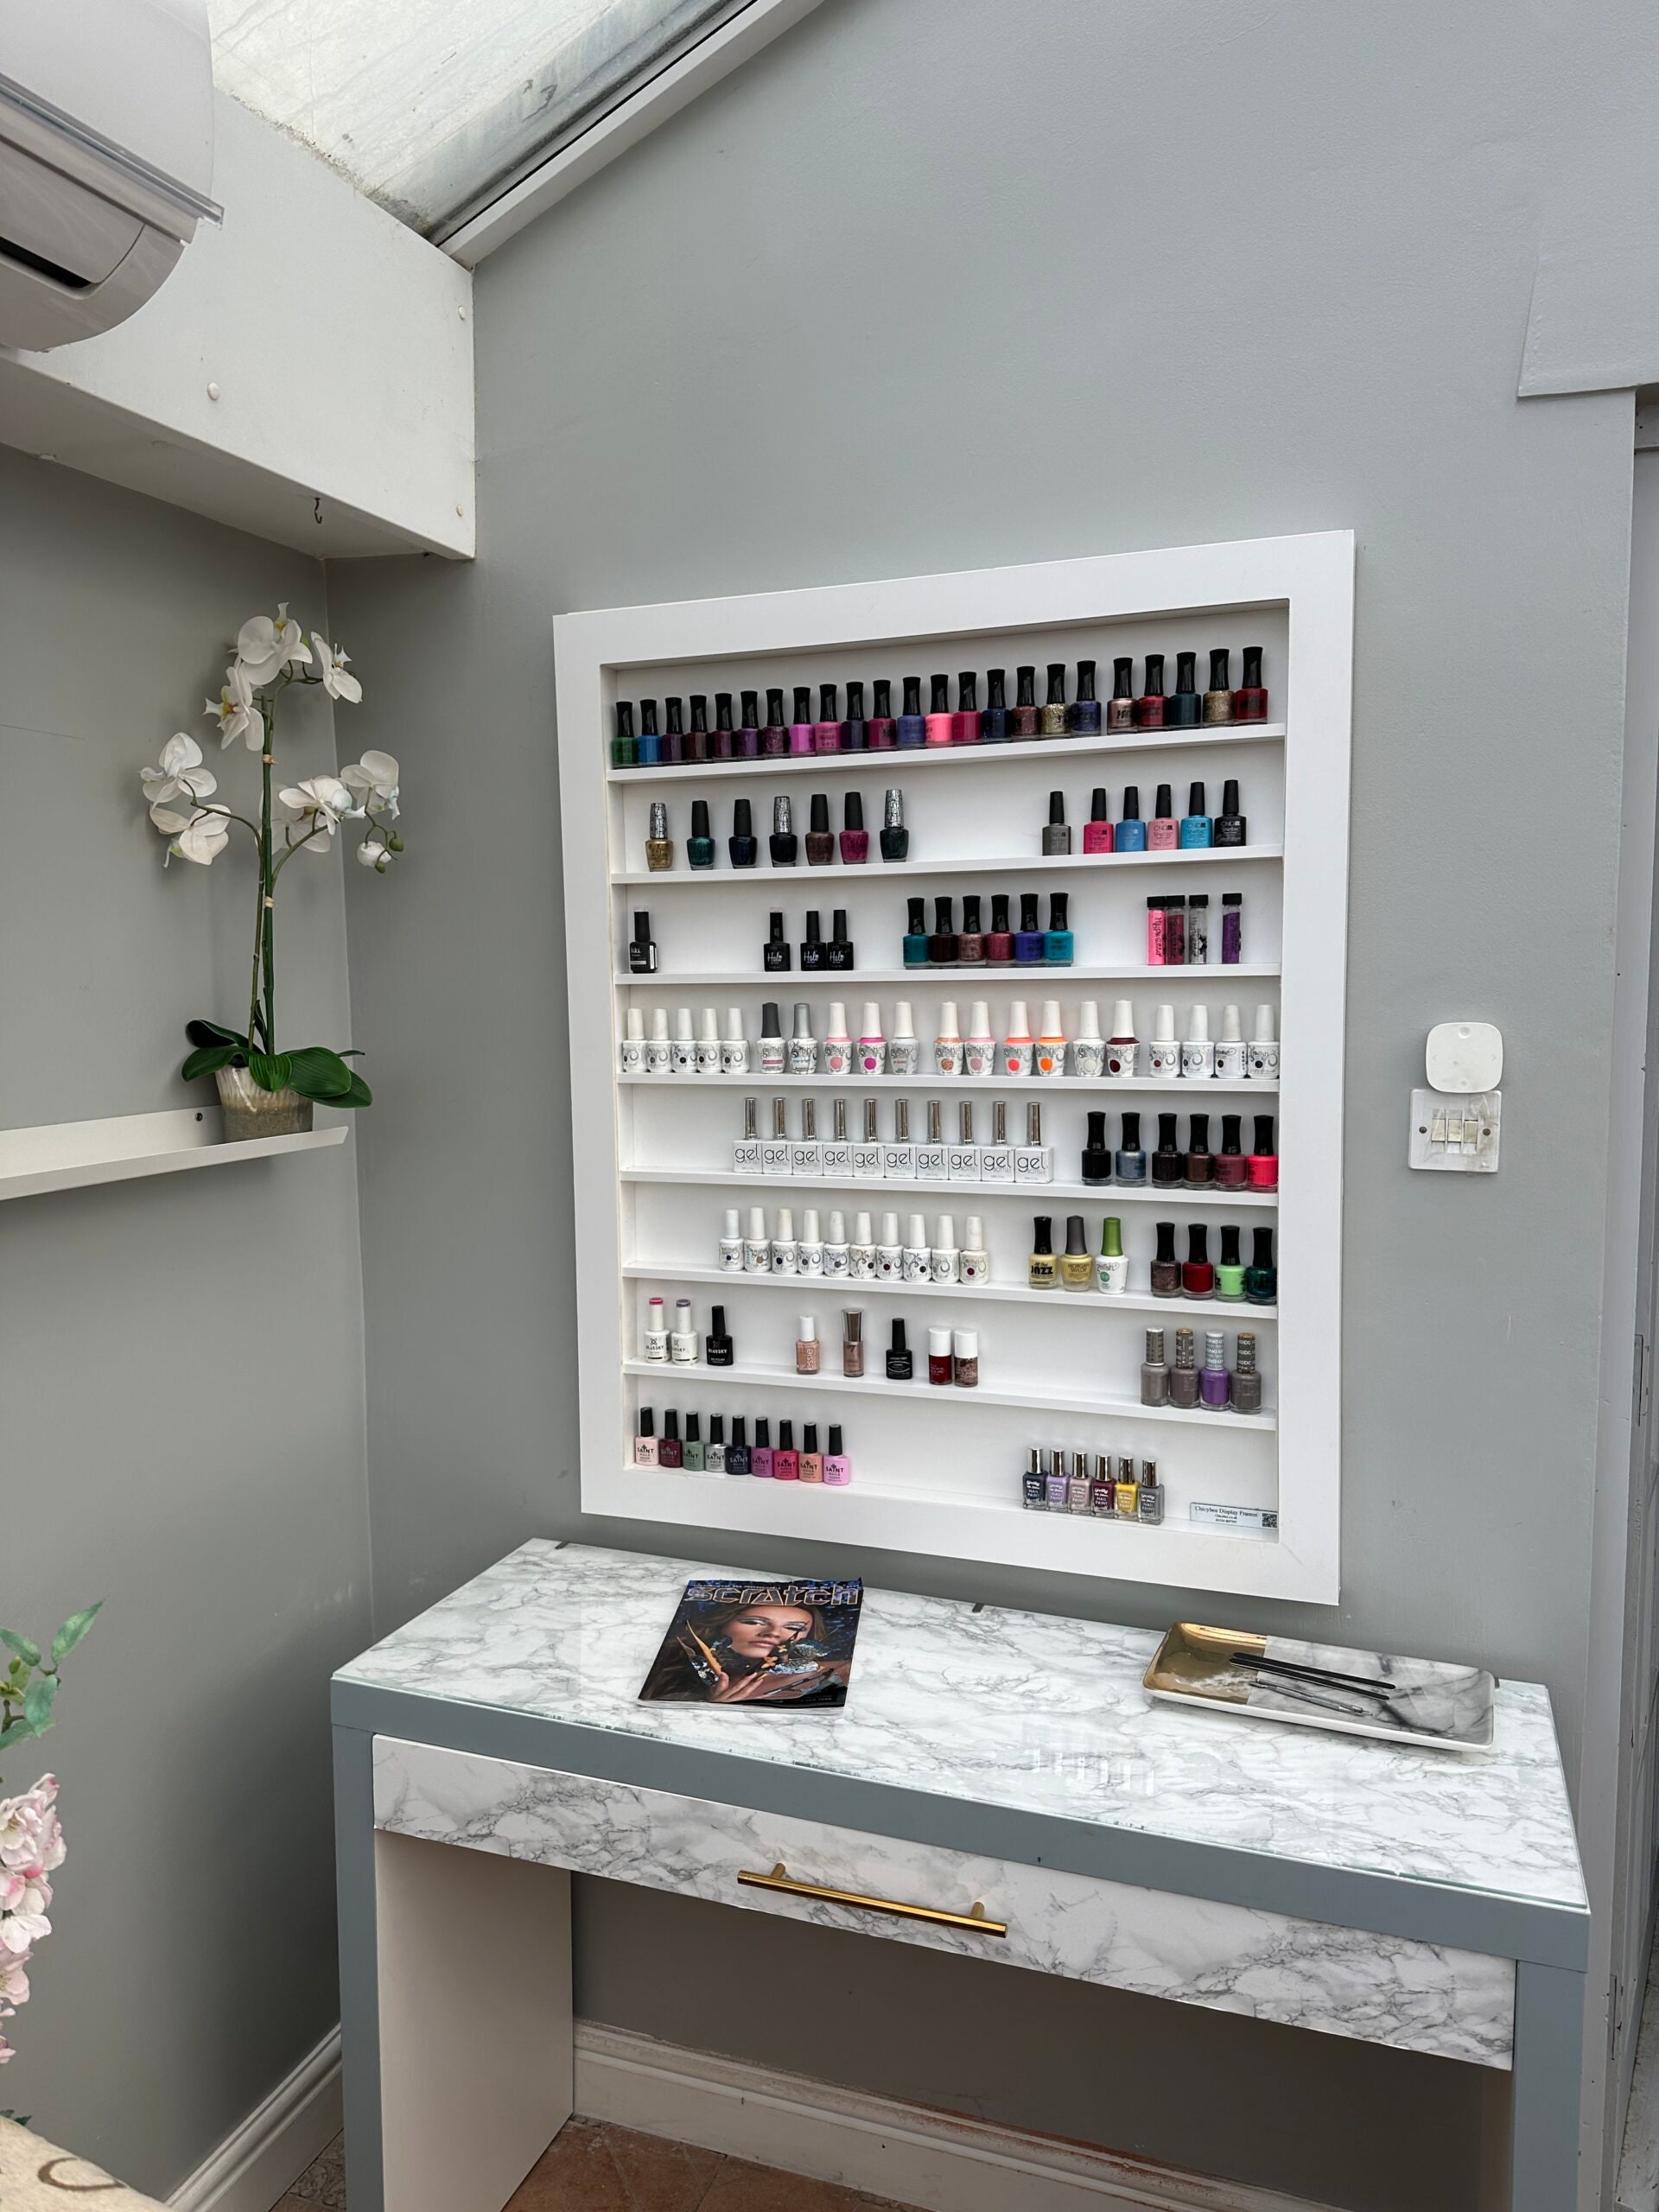 Steal These Storage Solutions  Nail salon decor, Home nail salon